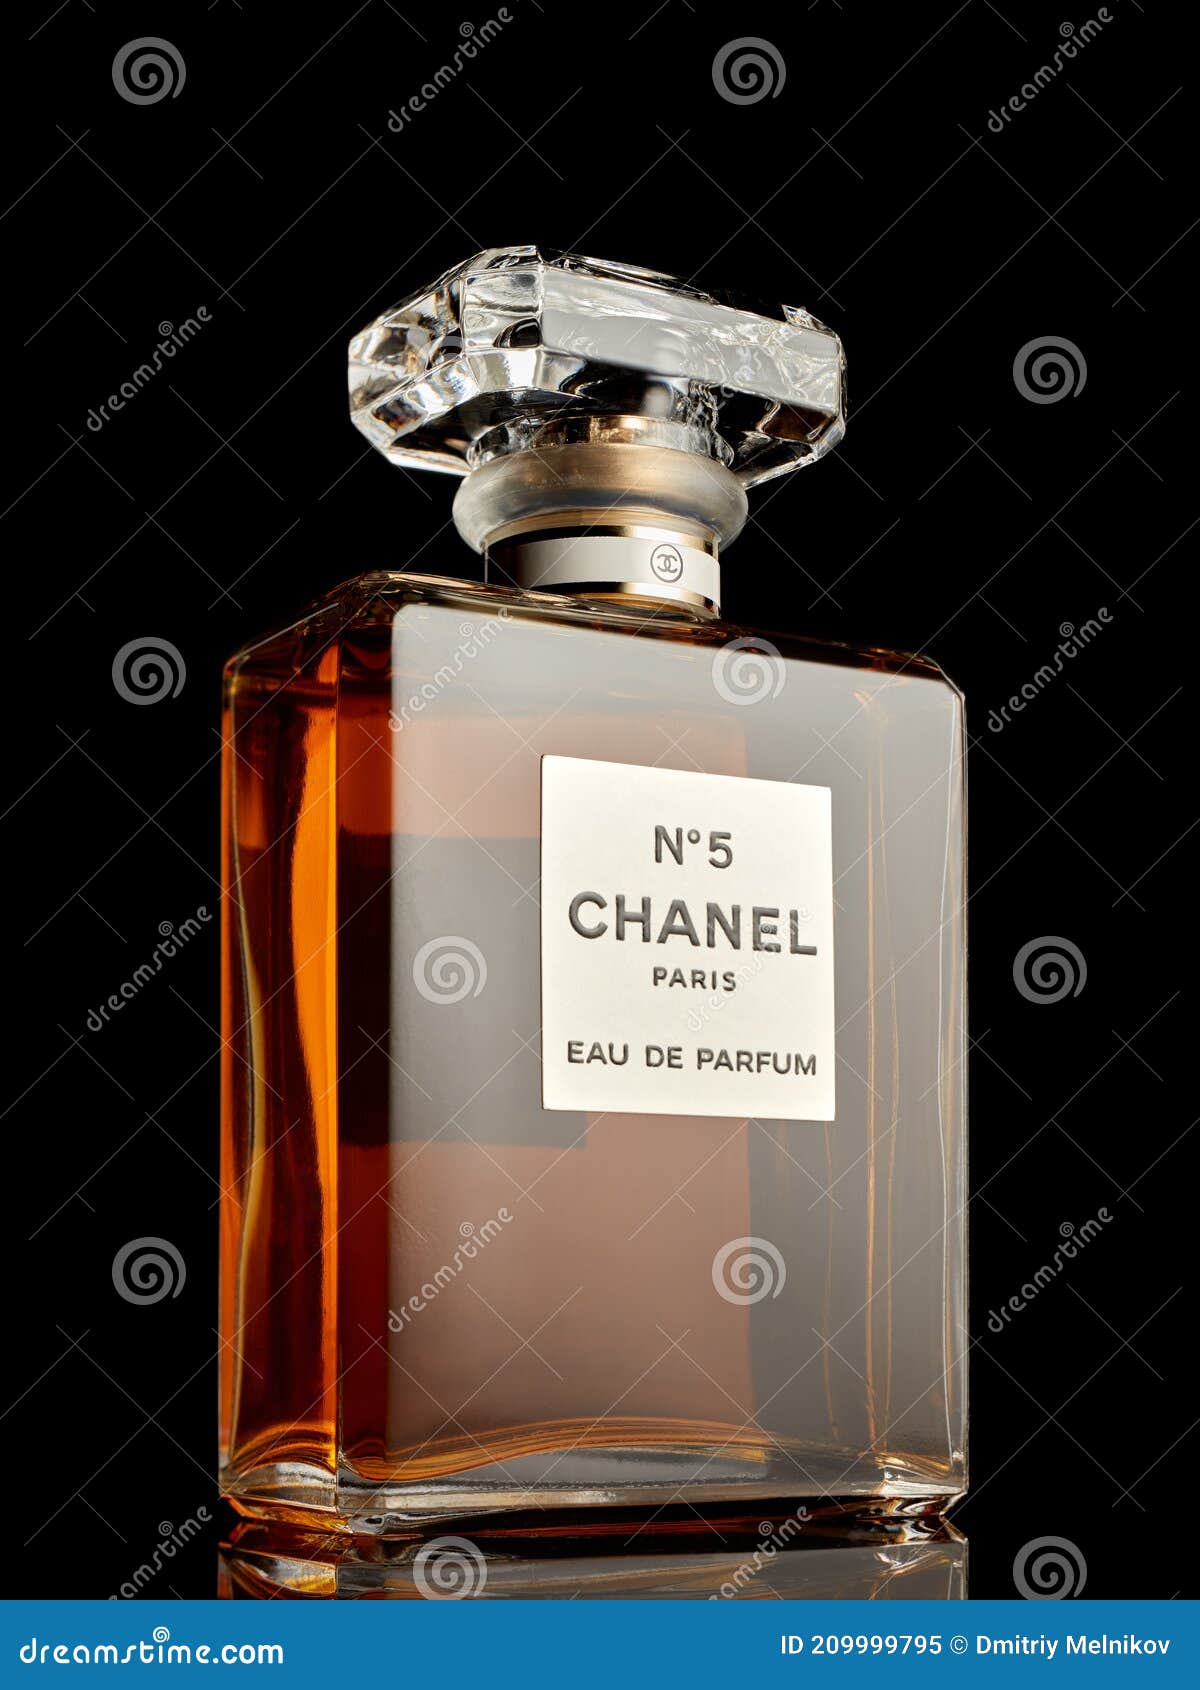 RUSSIA - OCTOBER 11, 2015: Coco Chanel Noir (Black) Perfume Bottle. Paris.  France Stock Photo, Picture and Royalty Free Image. Image 61818871.